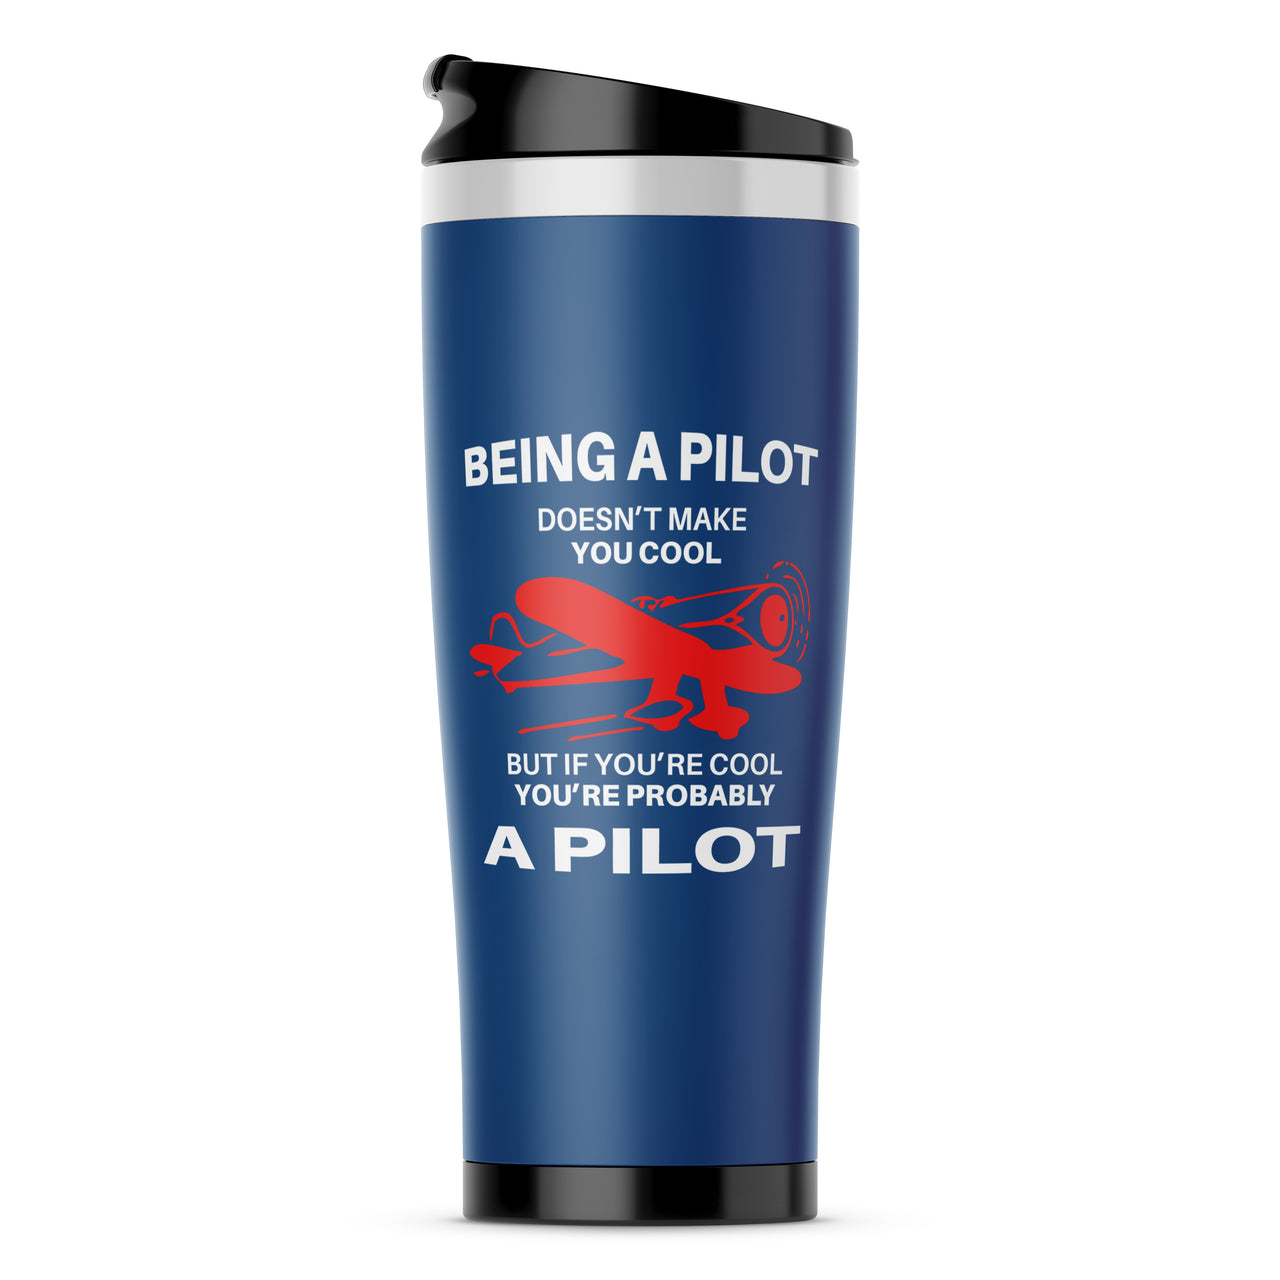 If You're Cool You're Probably a Pilot Designed Travel Mugs